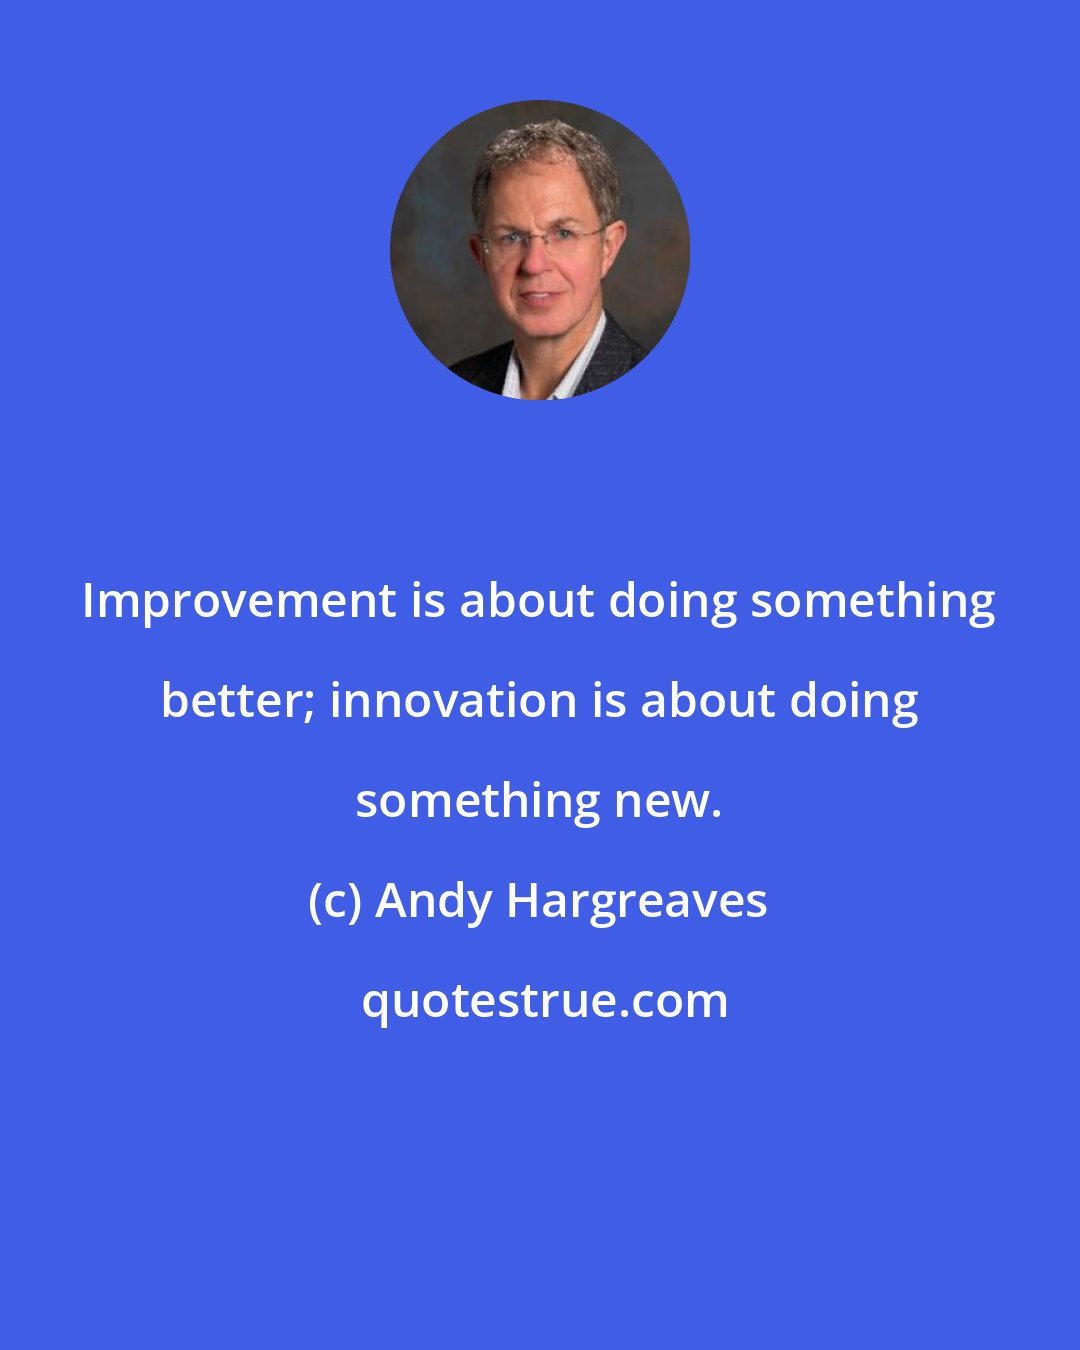 Andy Hargreaves: Improvement is about doing something better; innovation is about doing something new.